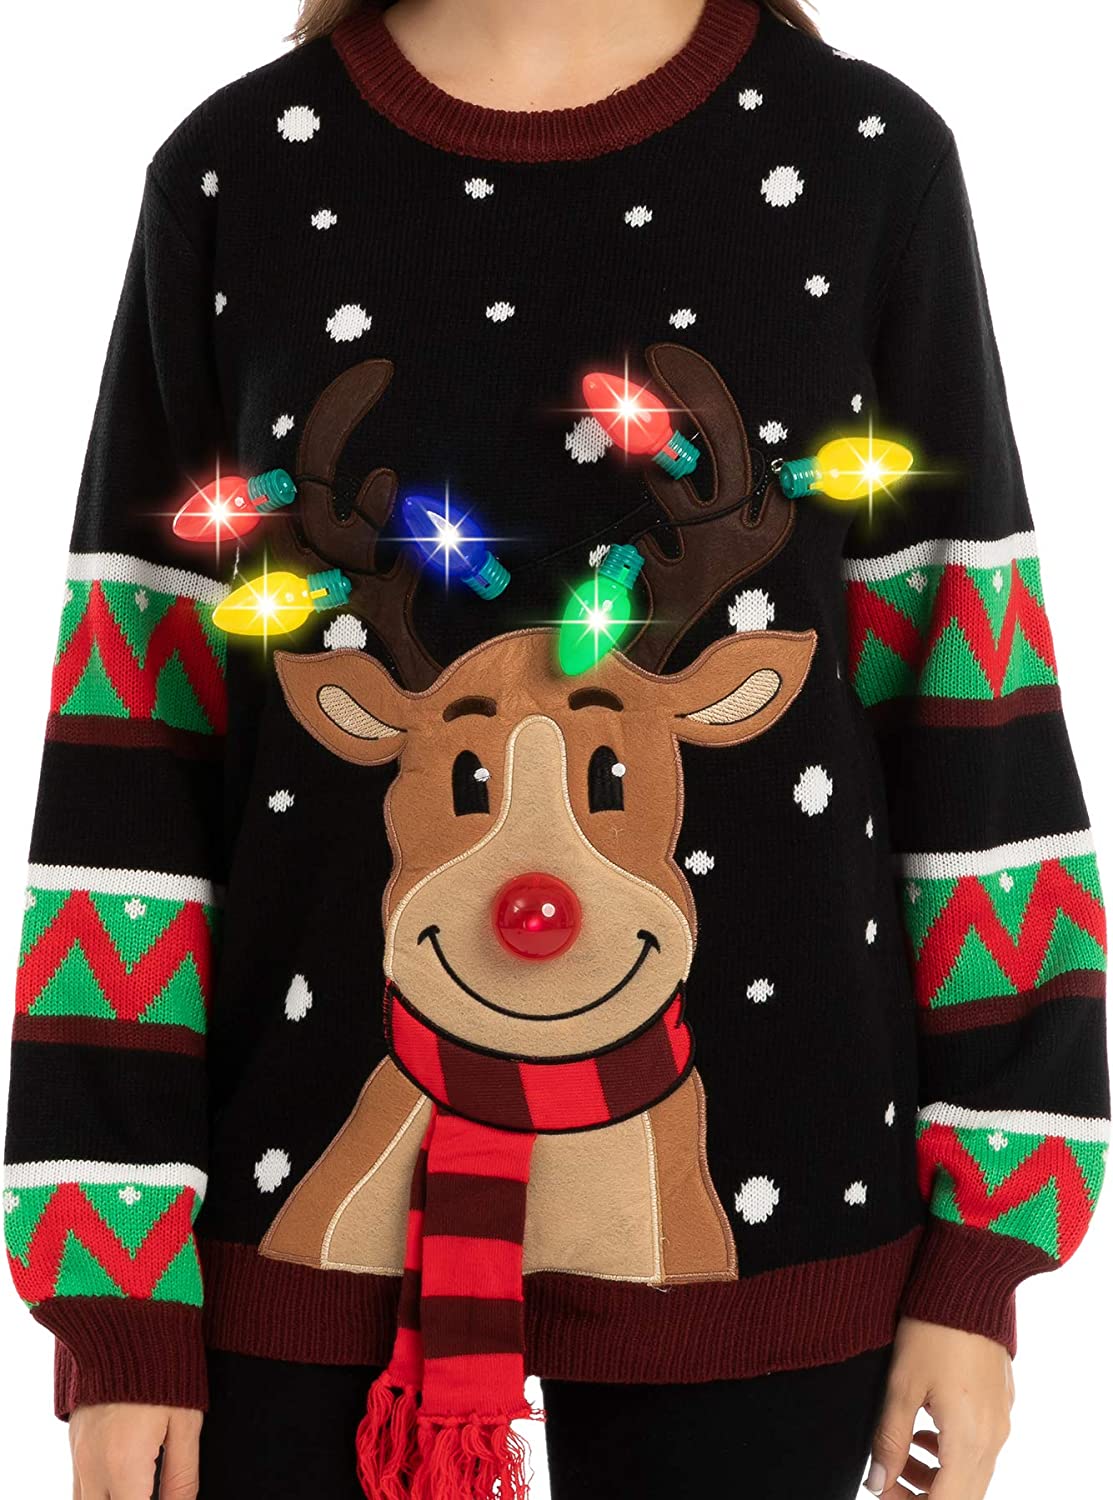 Ugly Christmas Sweater with a light-up reindeer.